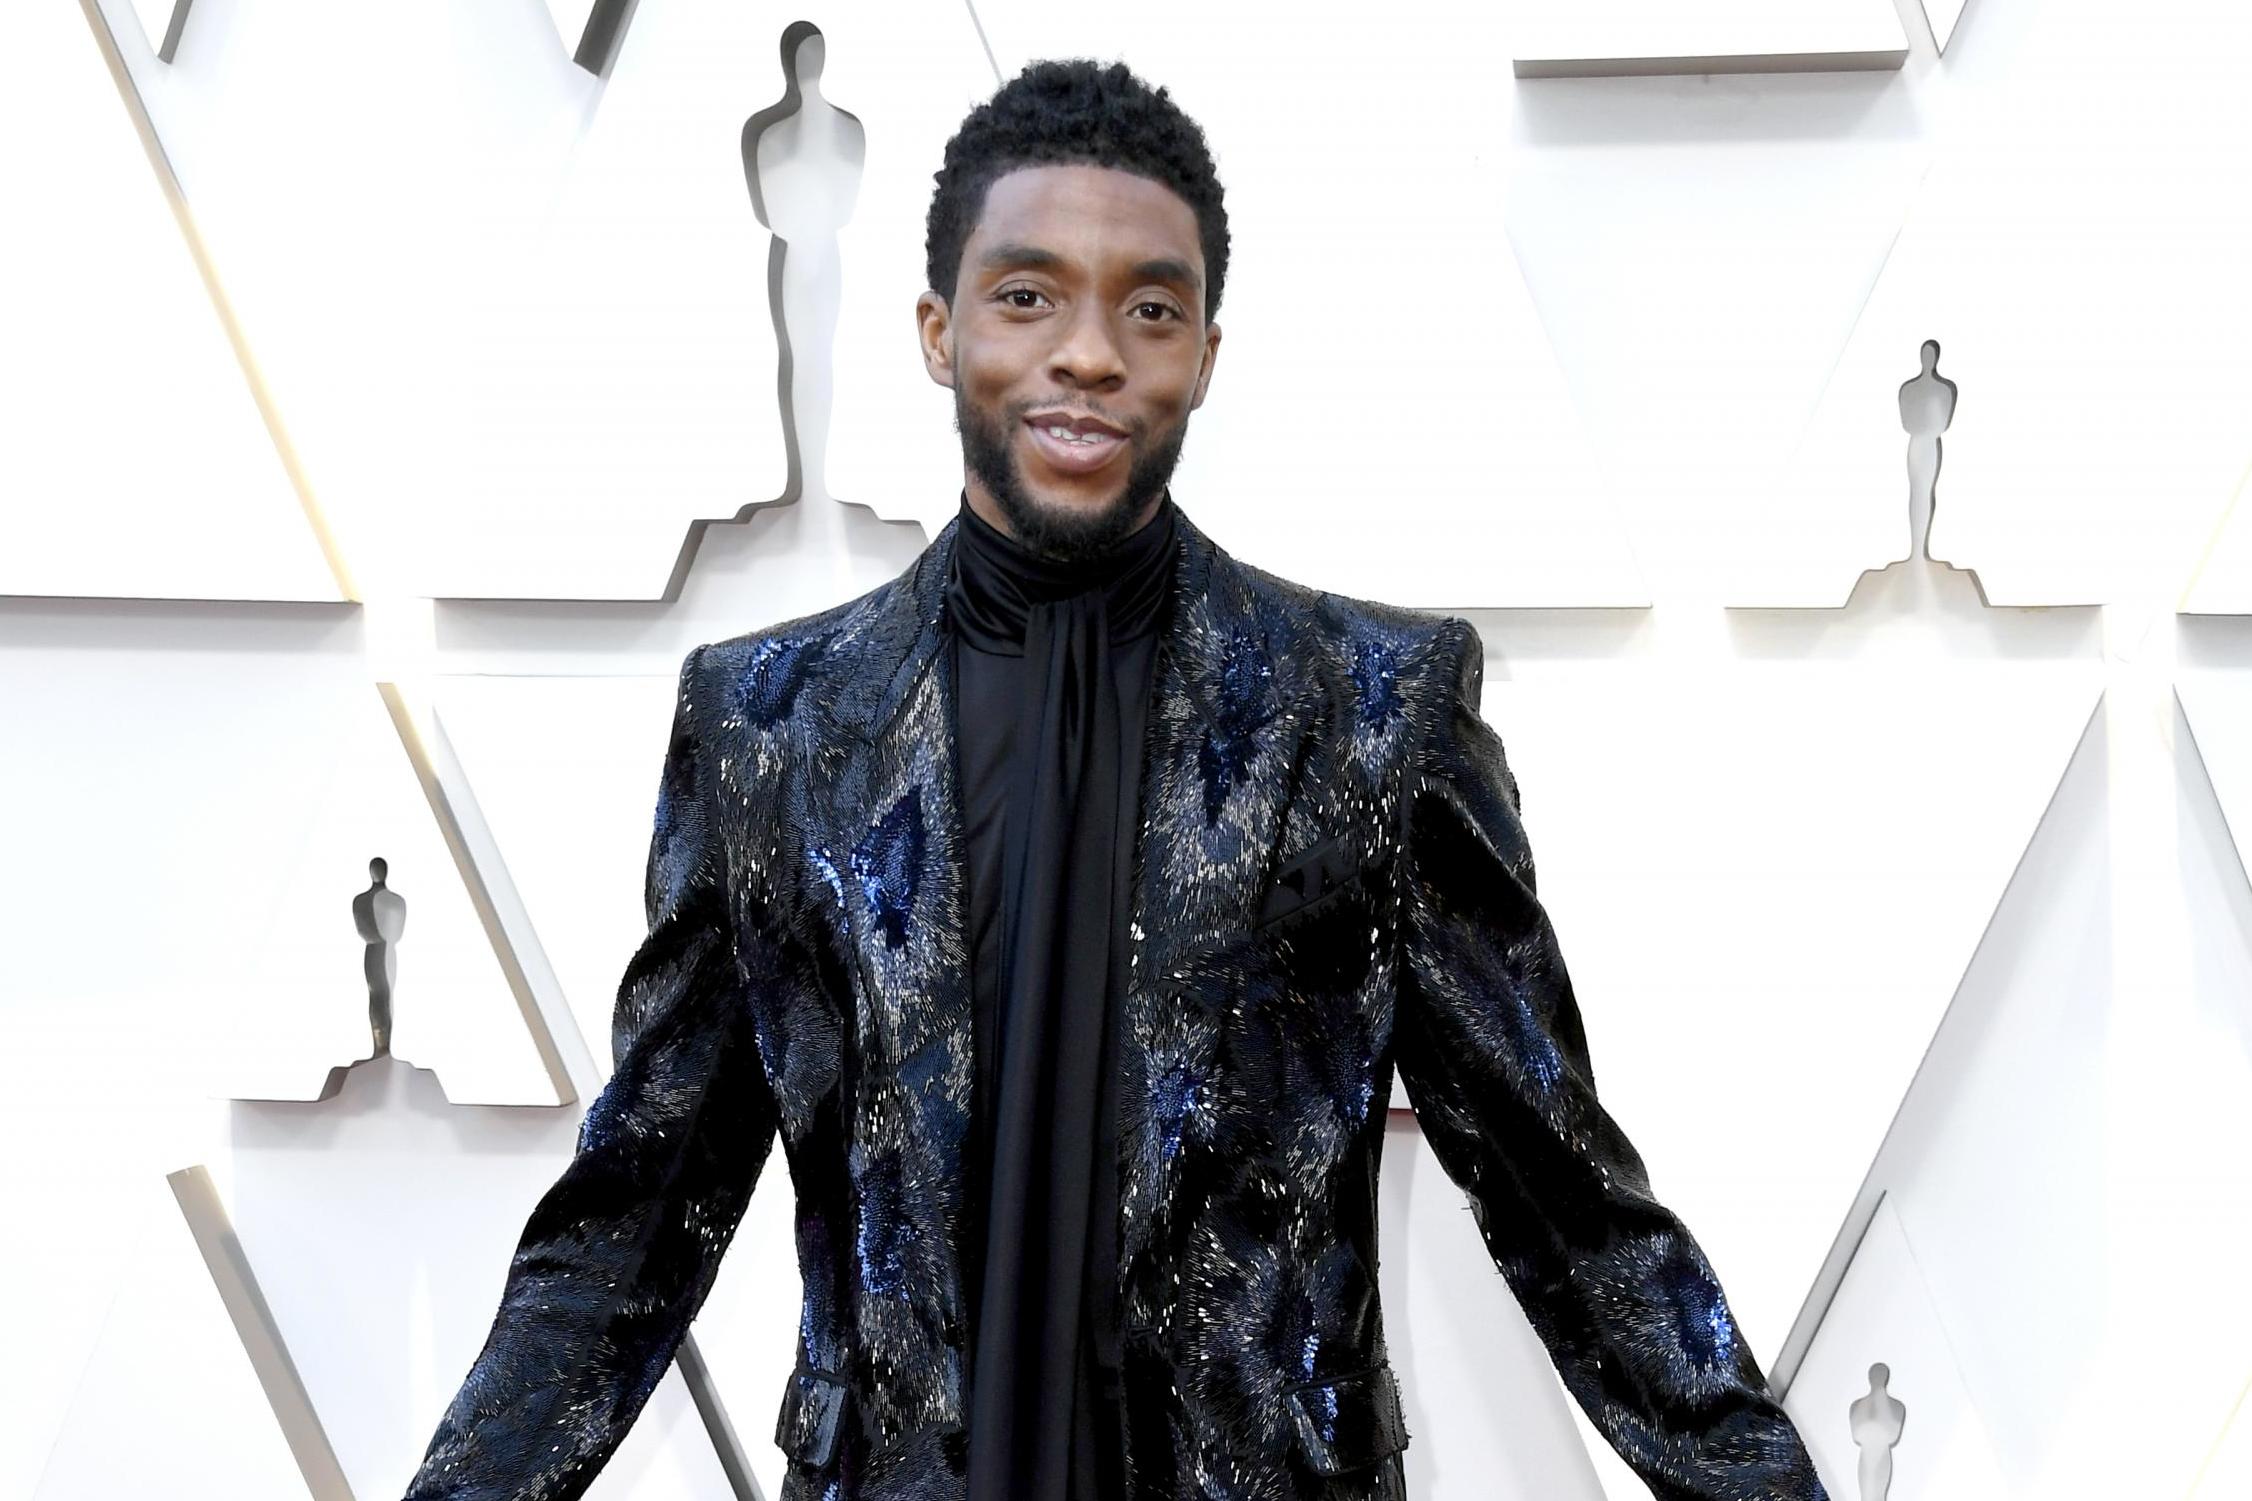 Chadwick Boseman at the Academy Awards on 24 February 2019 in Hollywood, California.